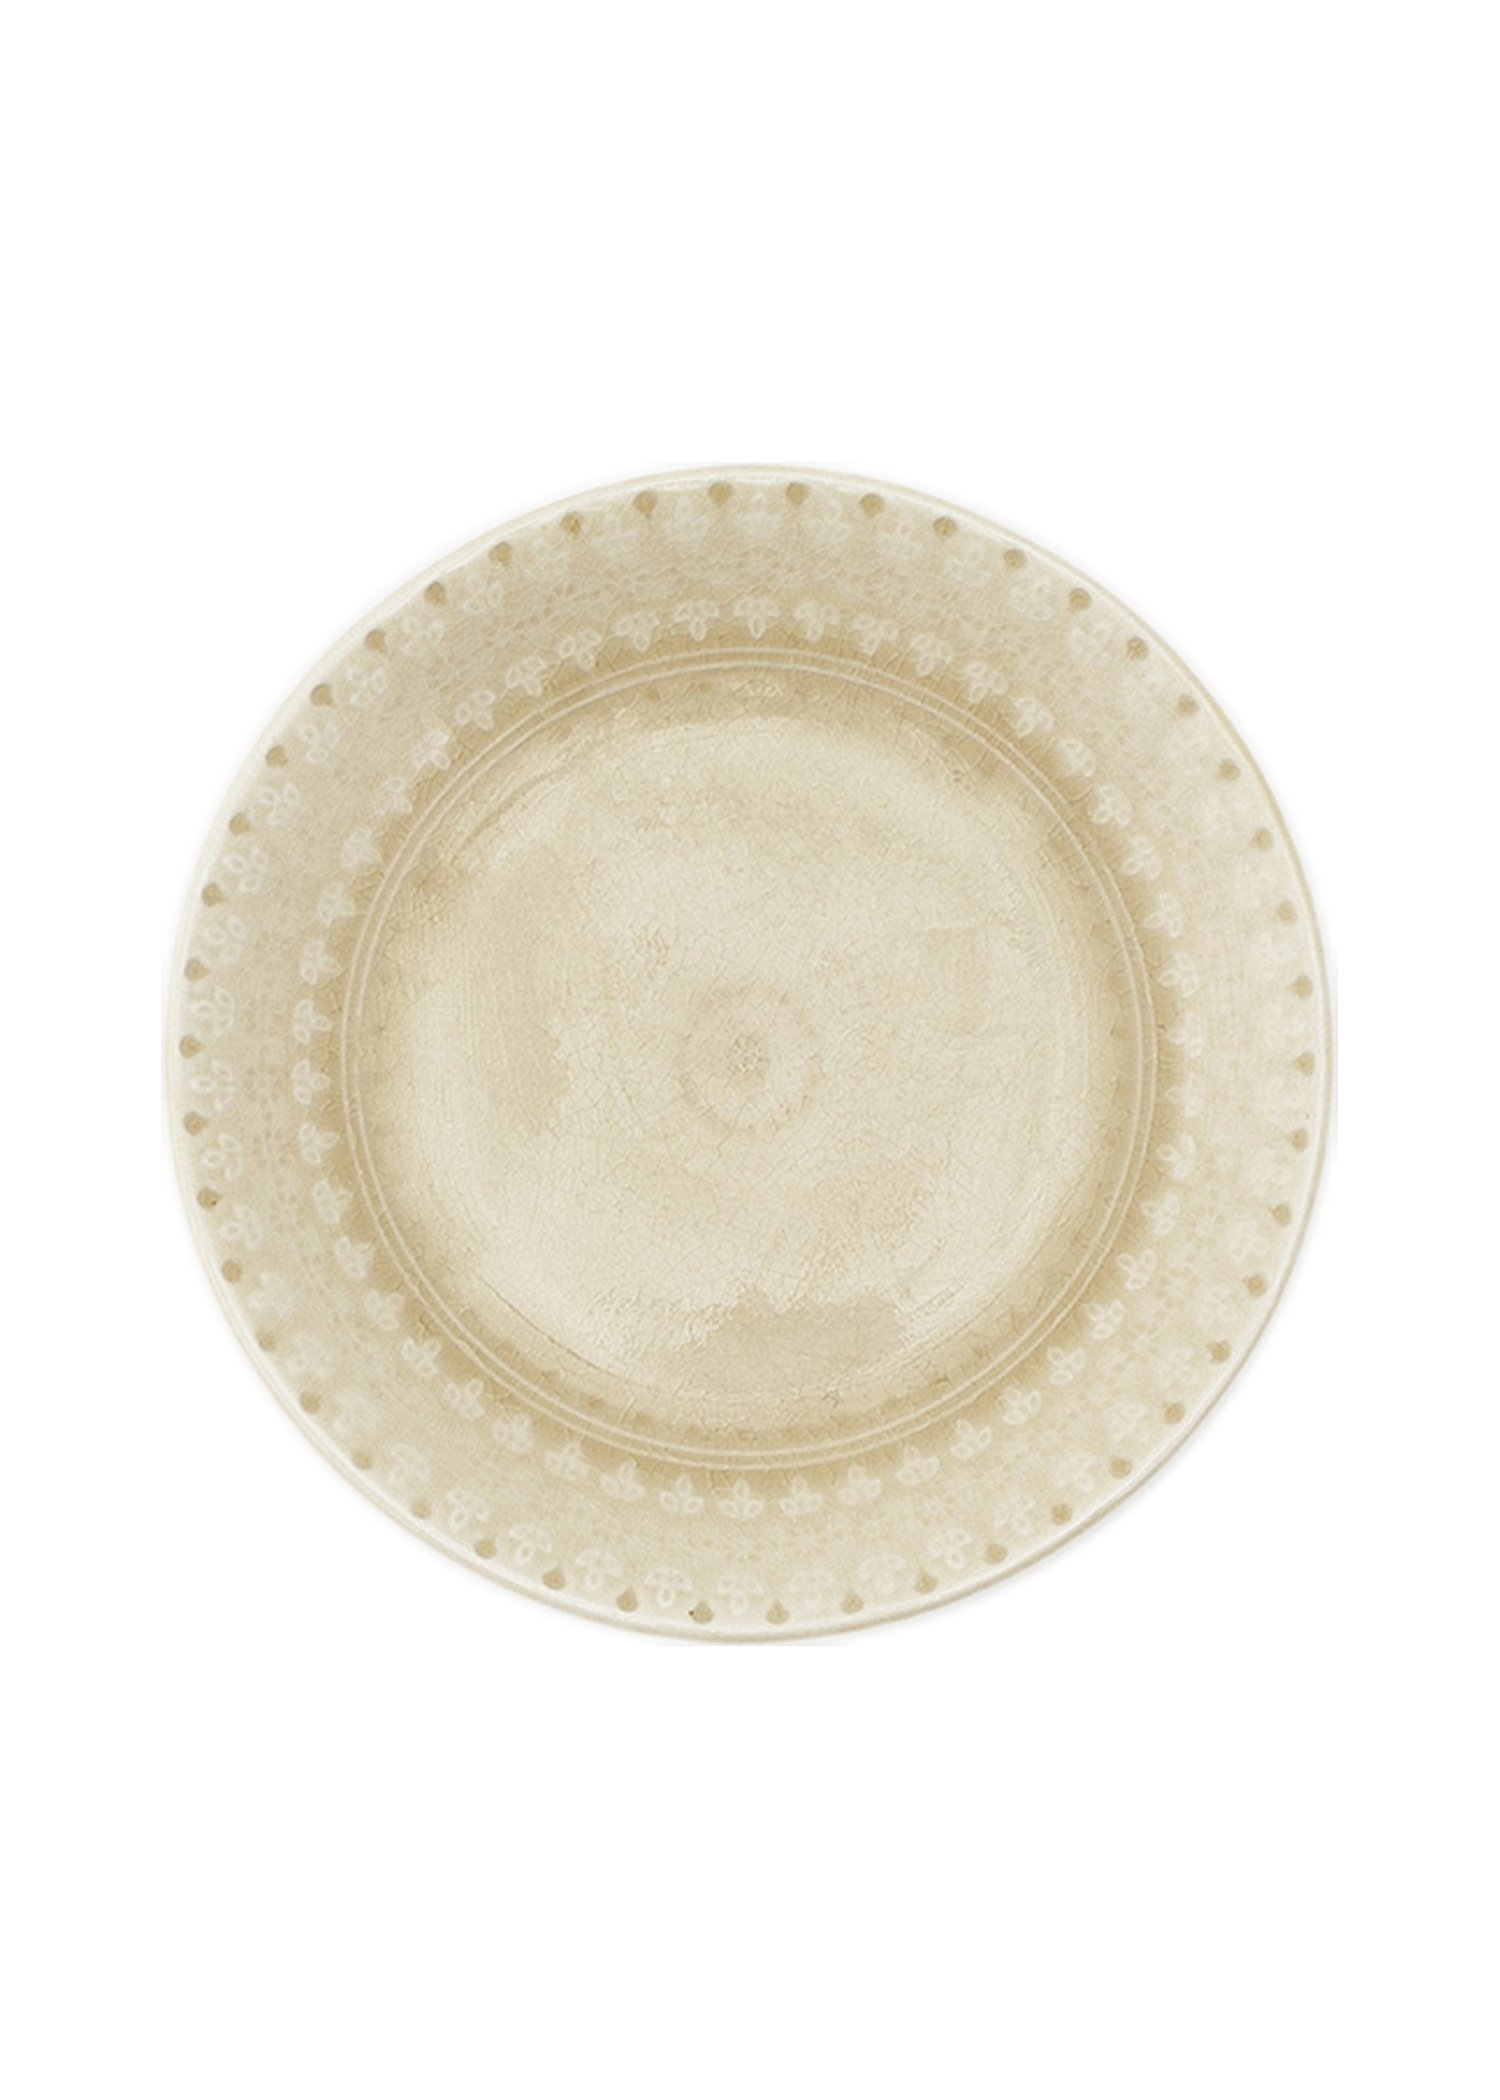 Stoneware side plate